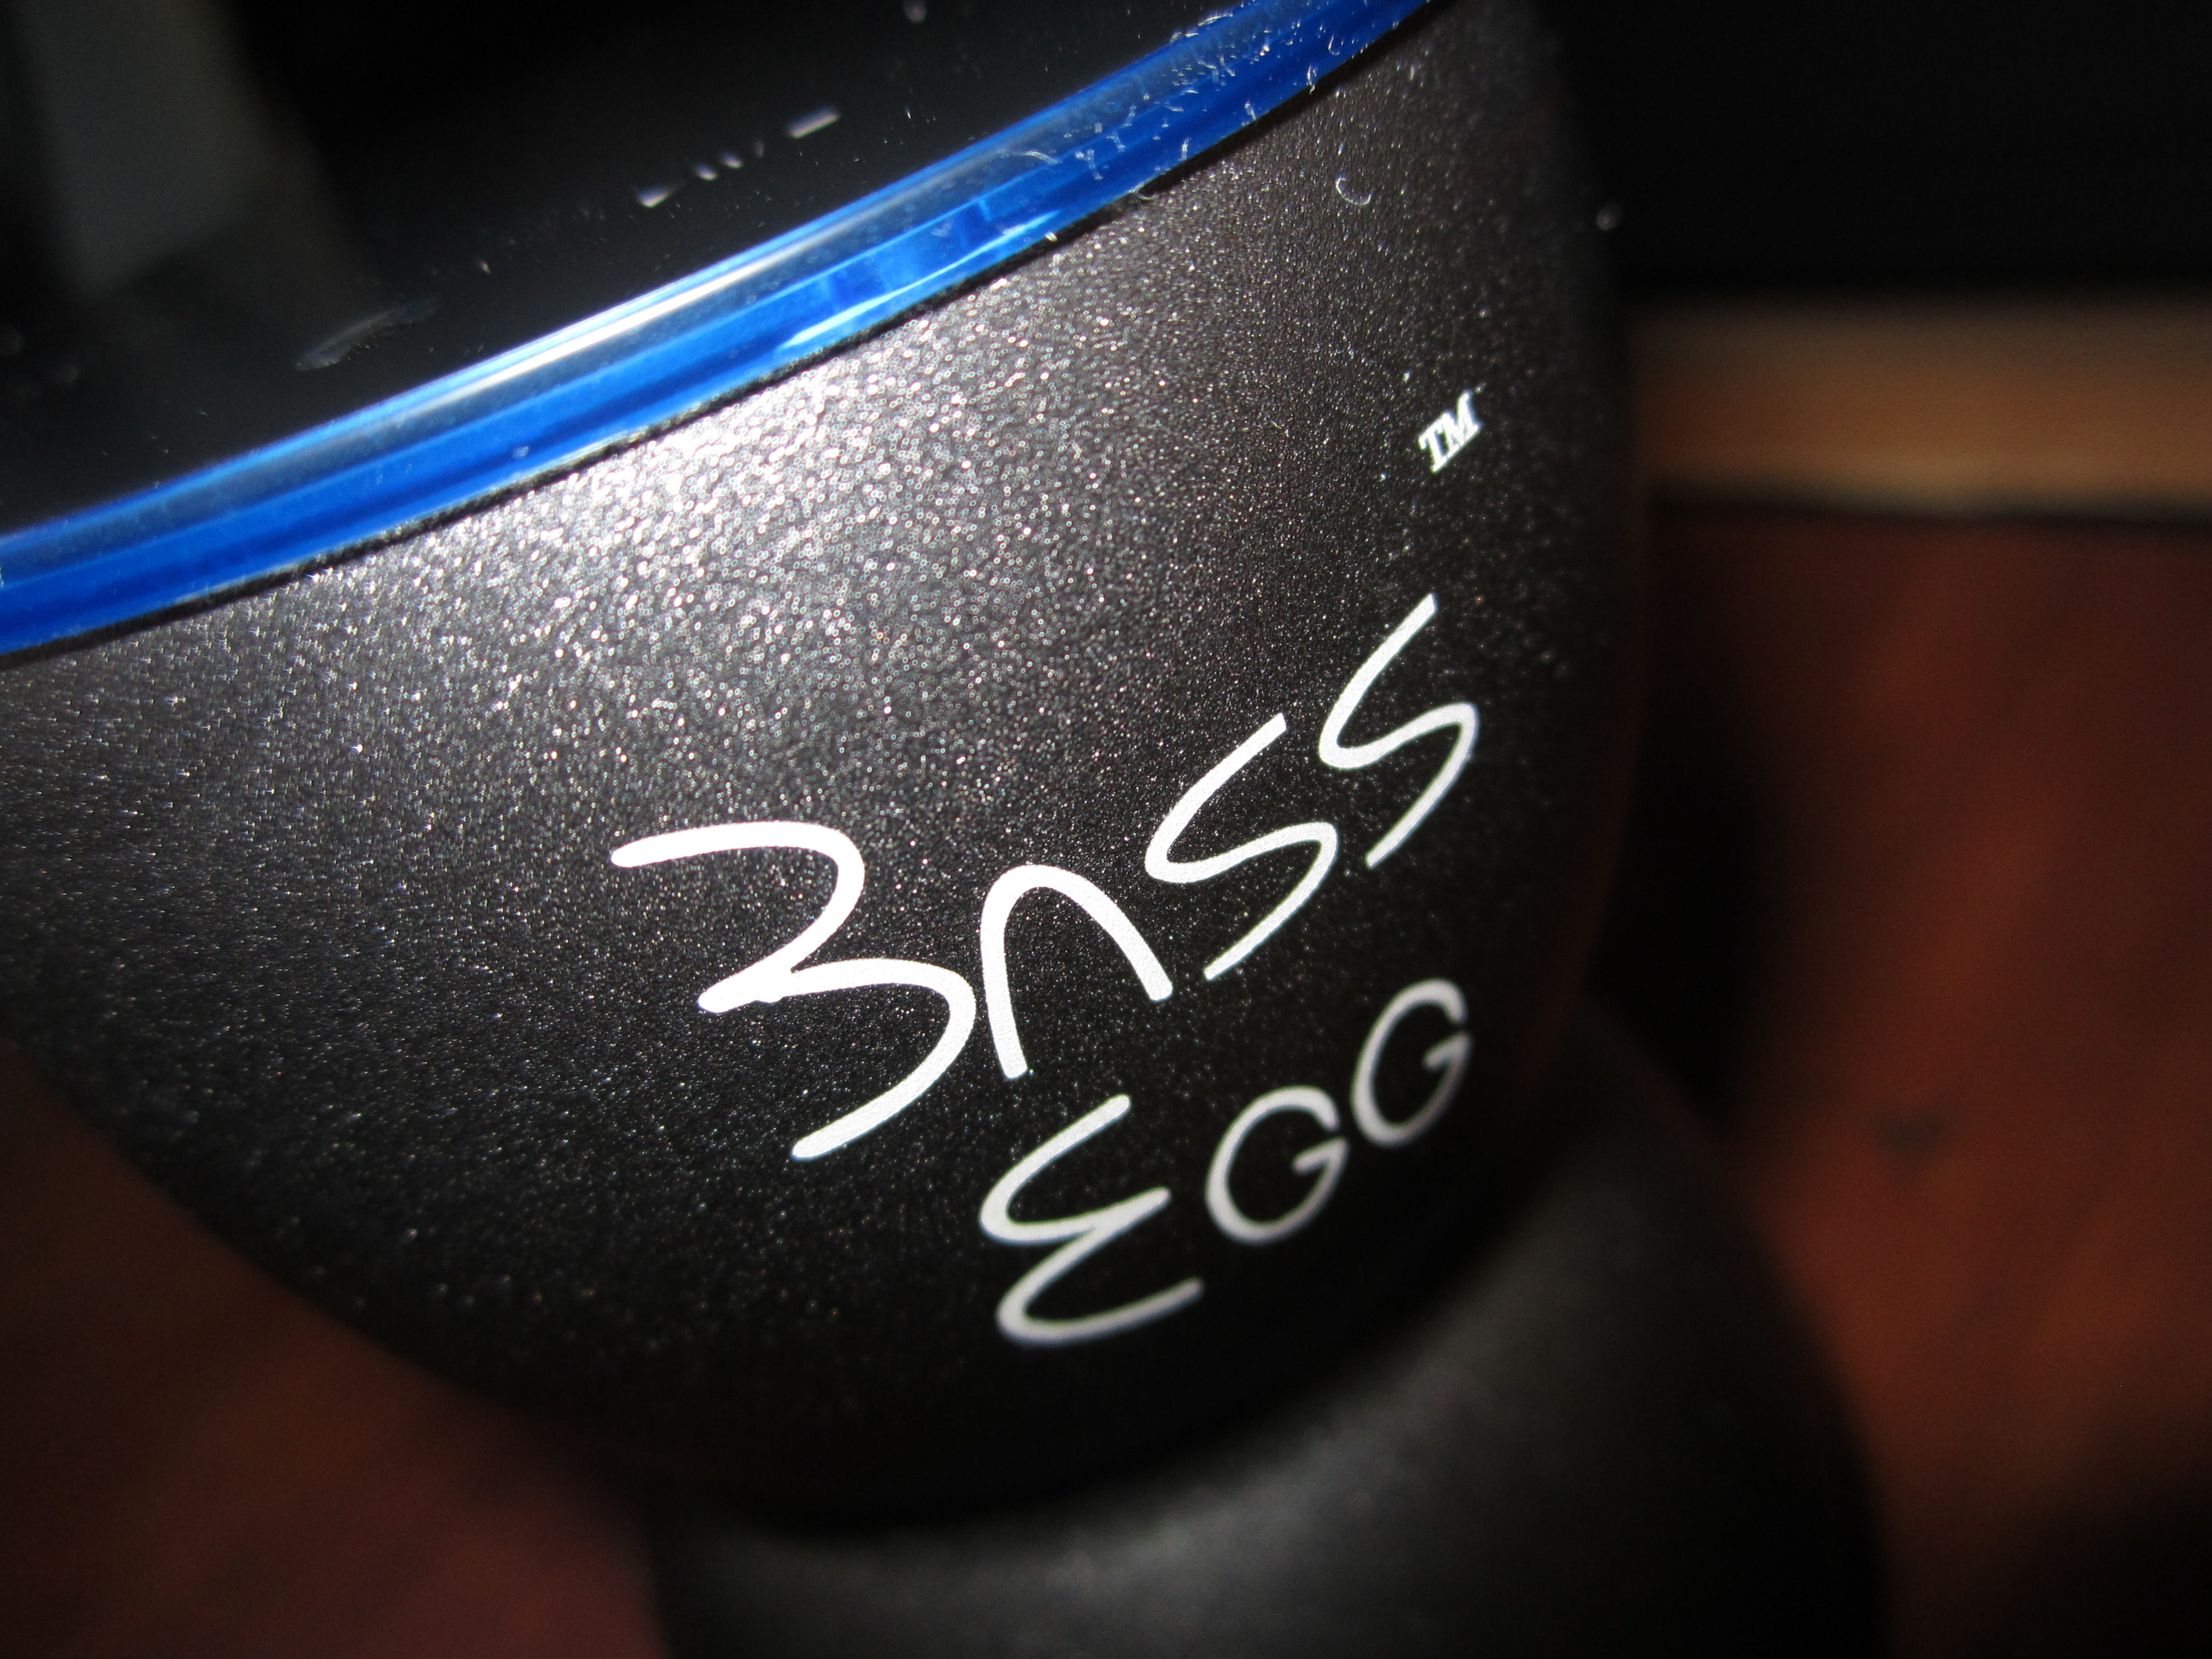 bassegg - for some reason we don't have an alt tag here